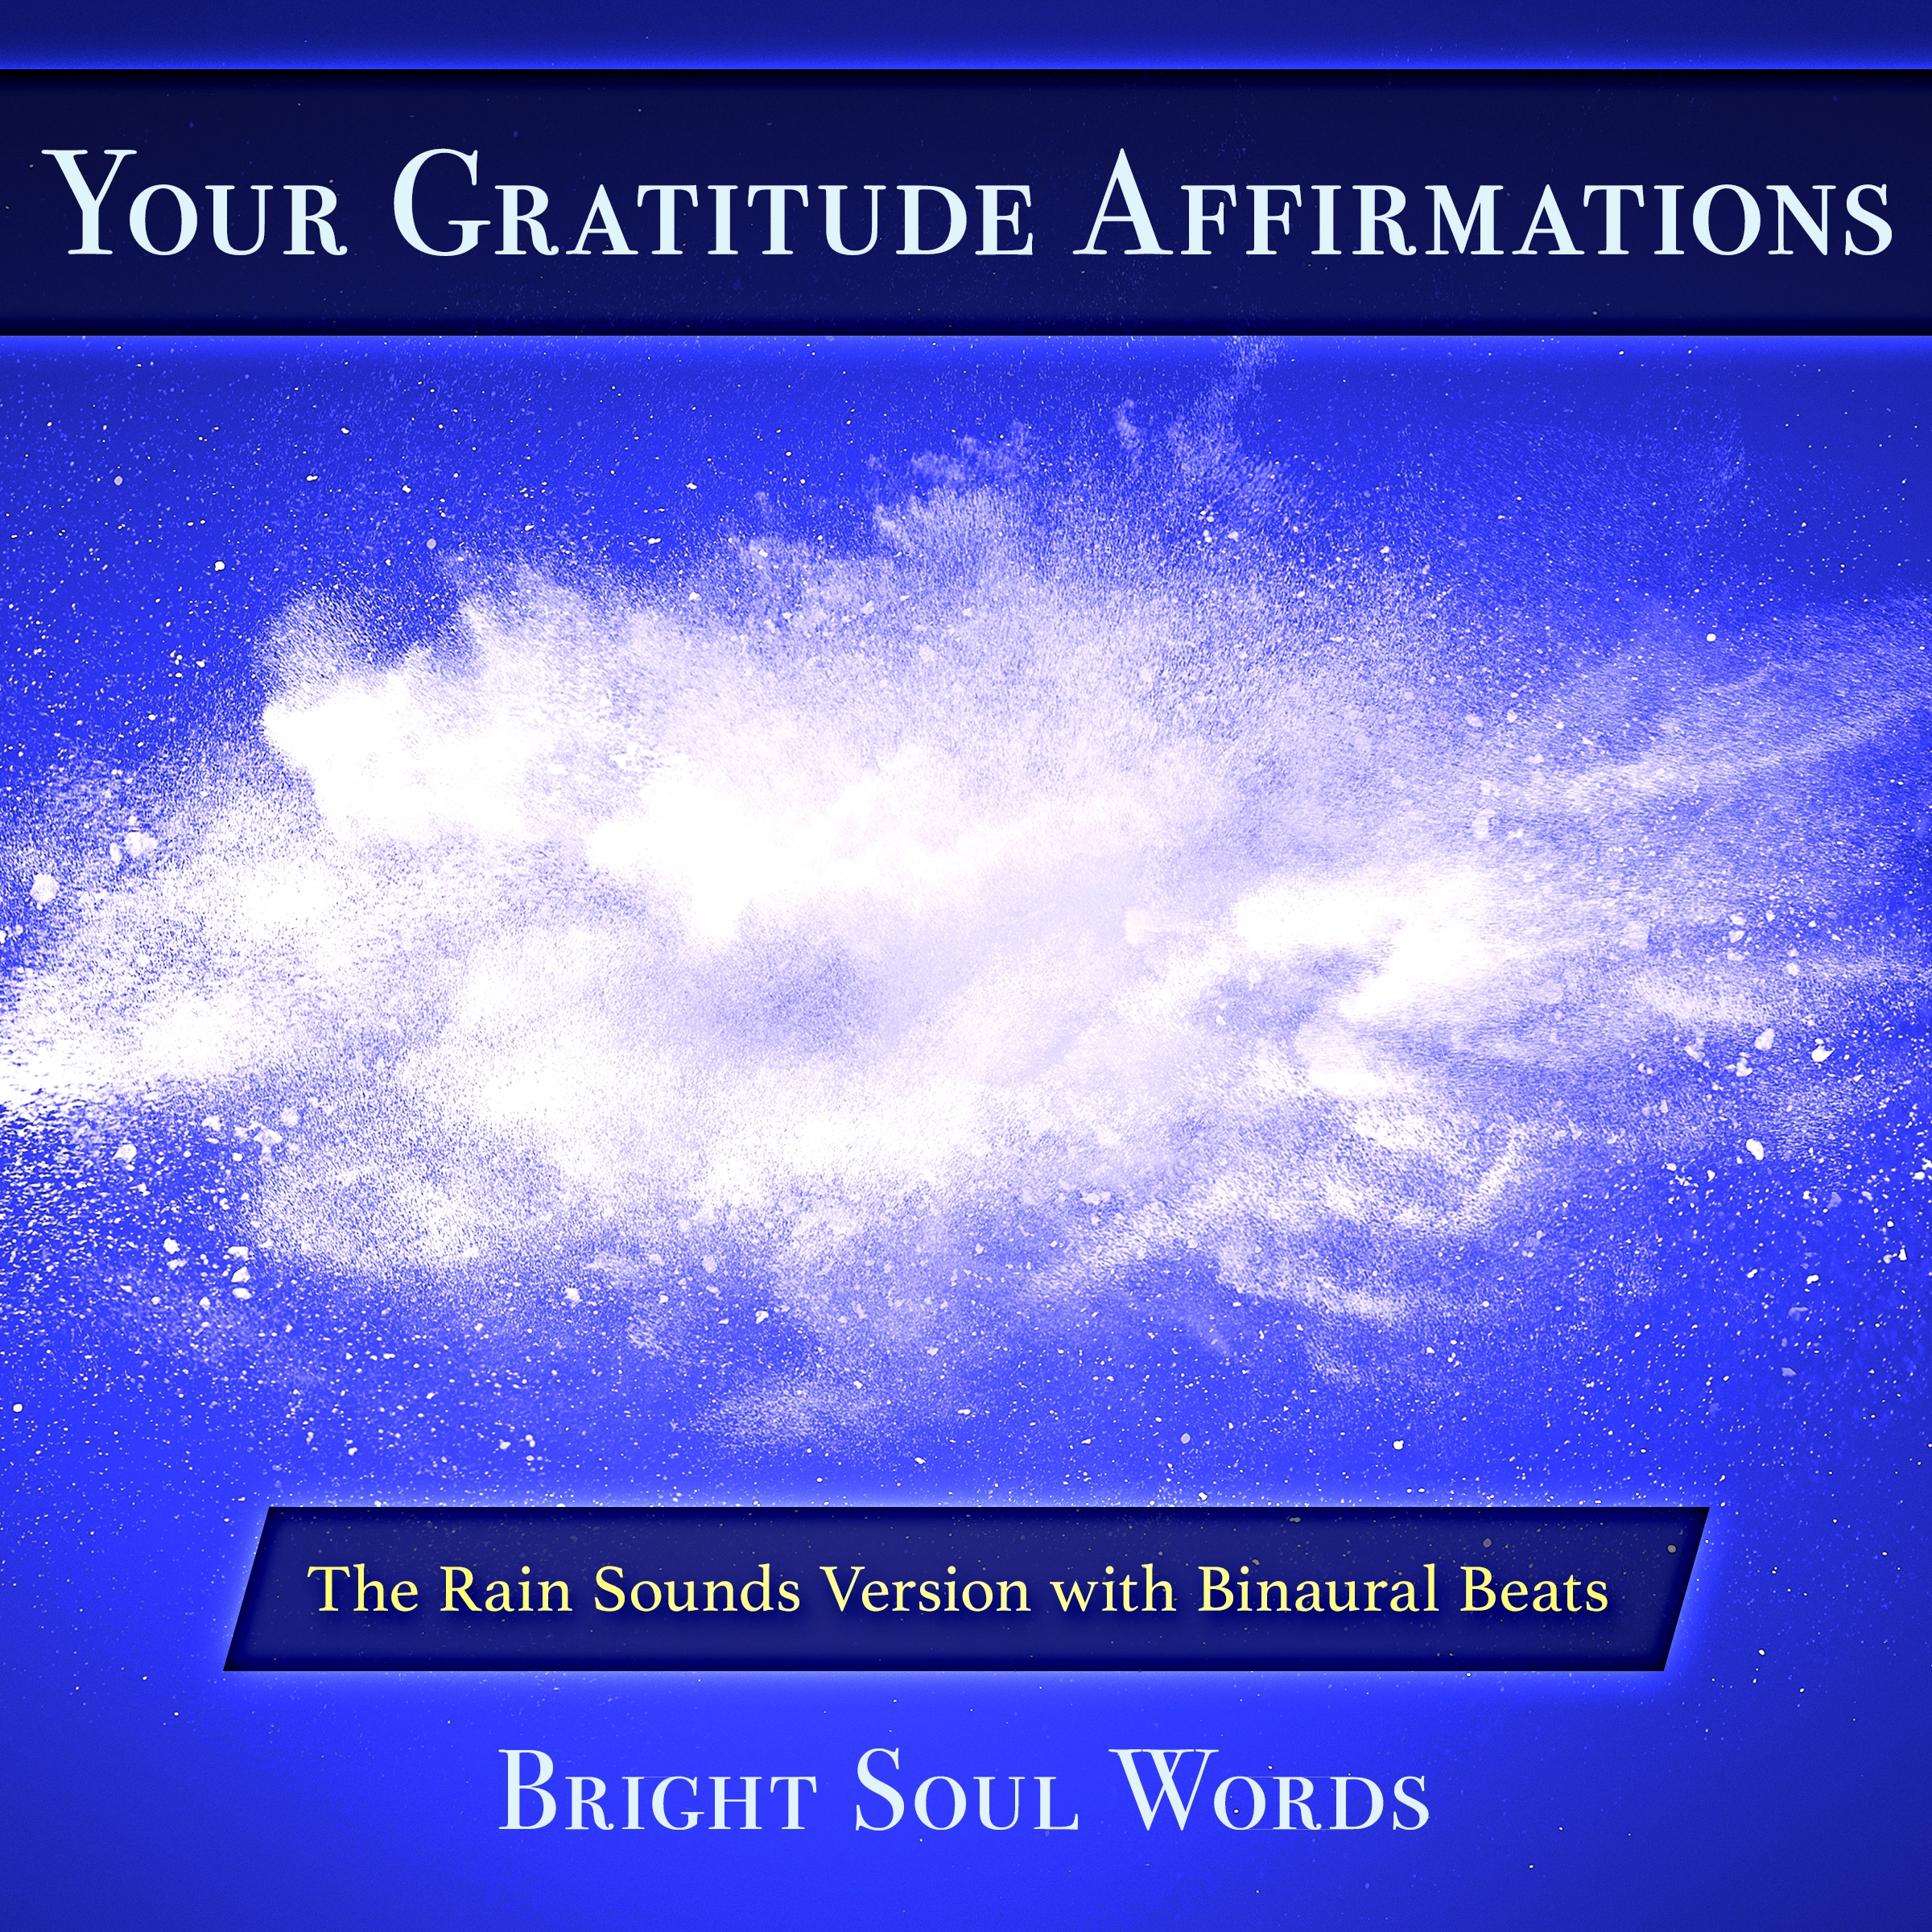 Your Gratitude Affirmations: The Rain Sounds Version with Binaural Beats Audiobook by Bright Soul Words